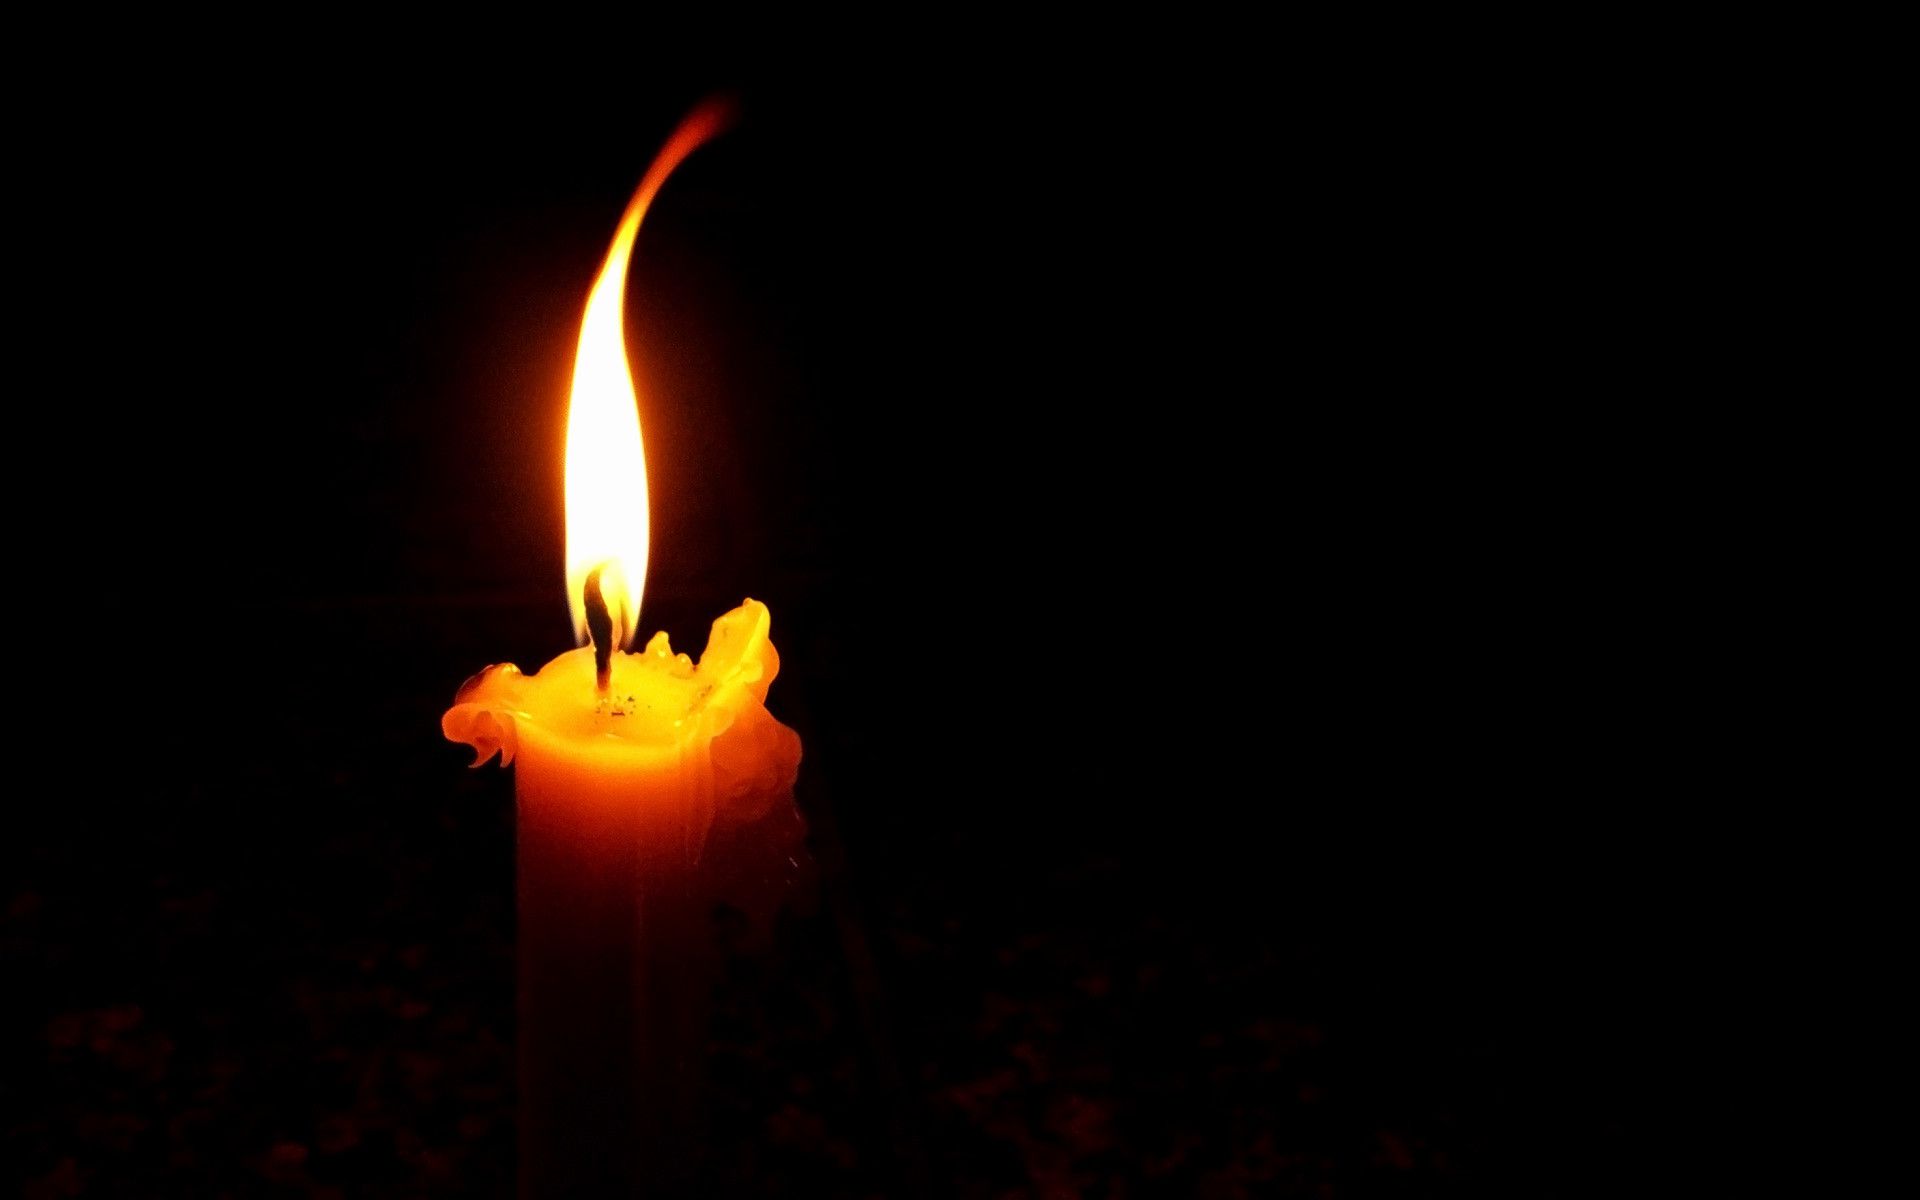 Download wallpaper 1920x1080 candle, light, shadow, reflection full hd,  hdtv, fhd, 1080p hd background